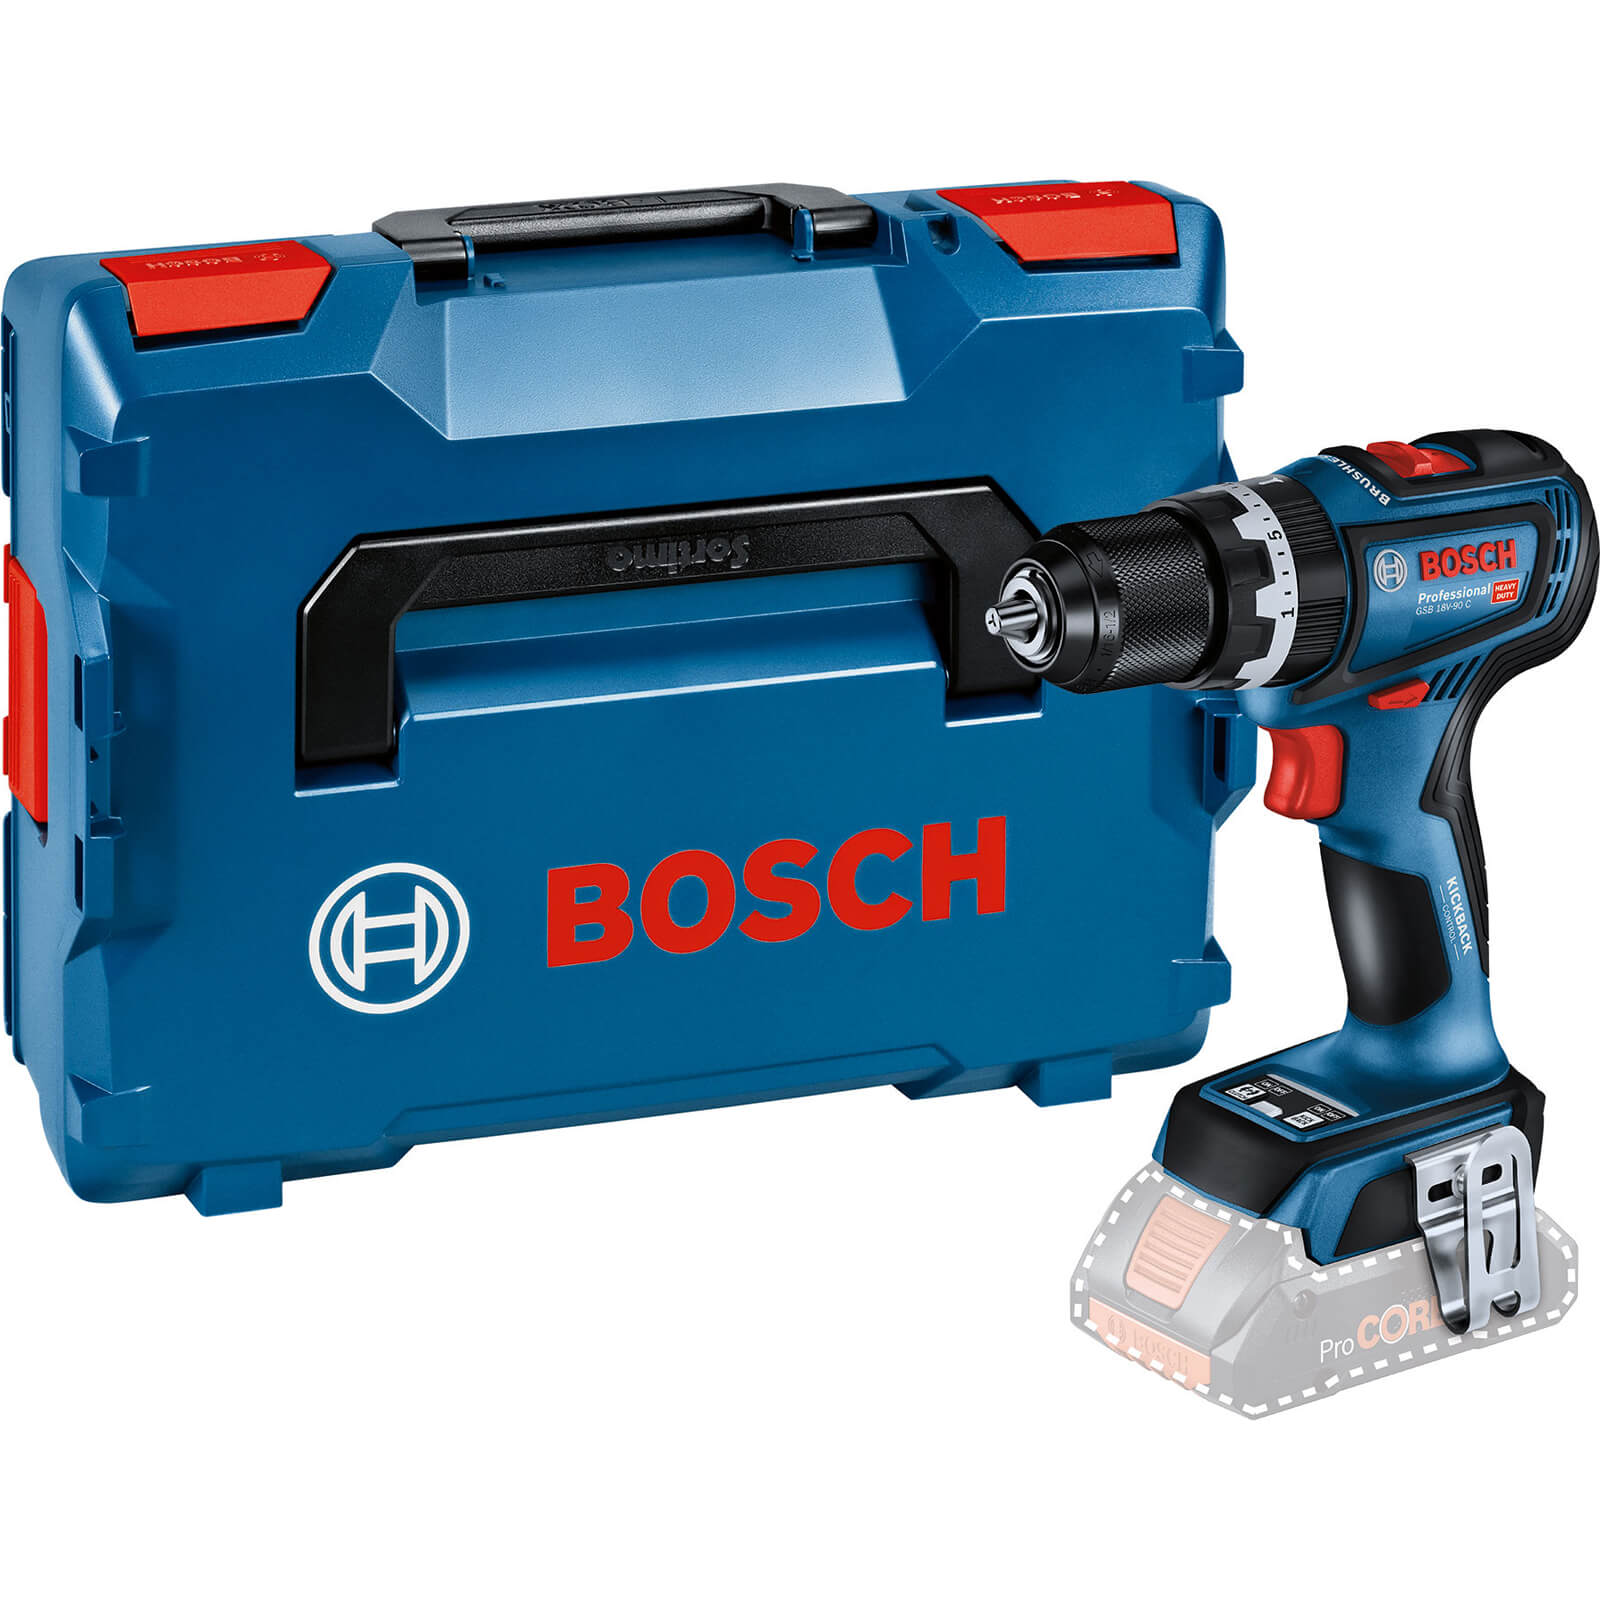 Bosch GSB 18V-90 C 18v Cordless Brushless Combi Drill With Kickback Control No Batteries No Charger Case